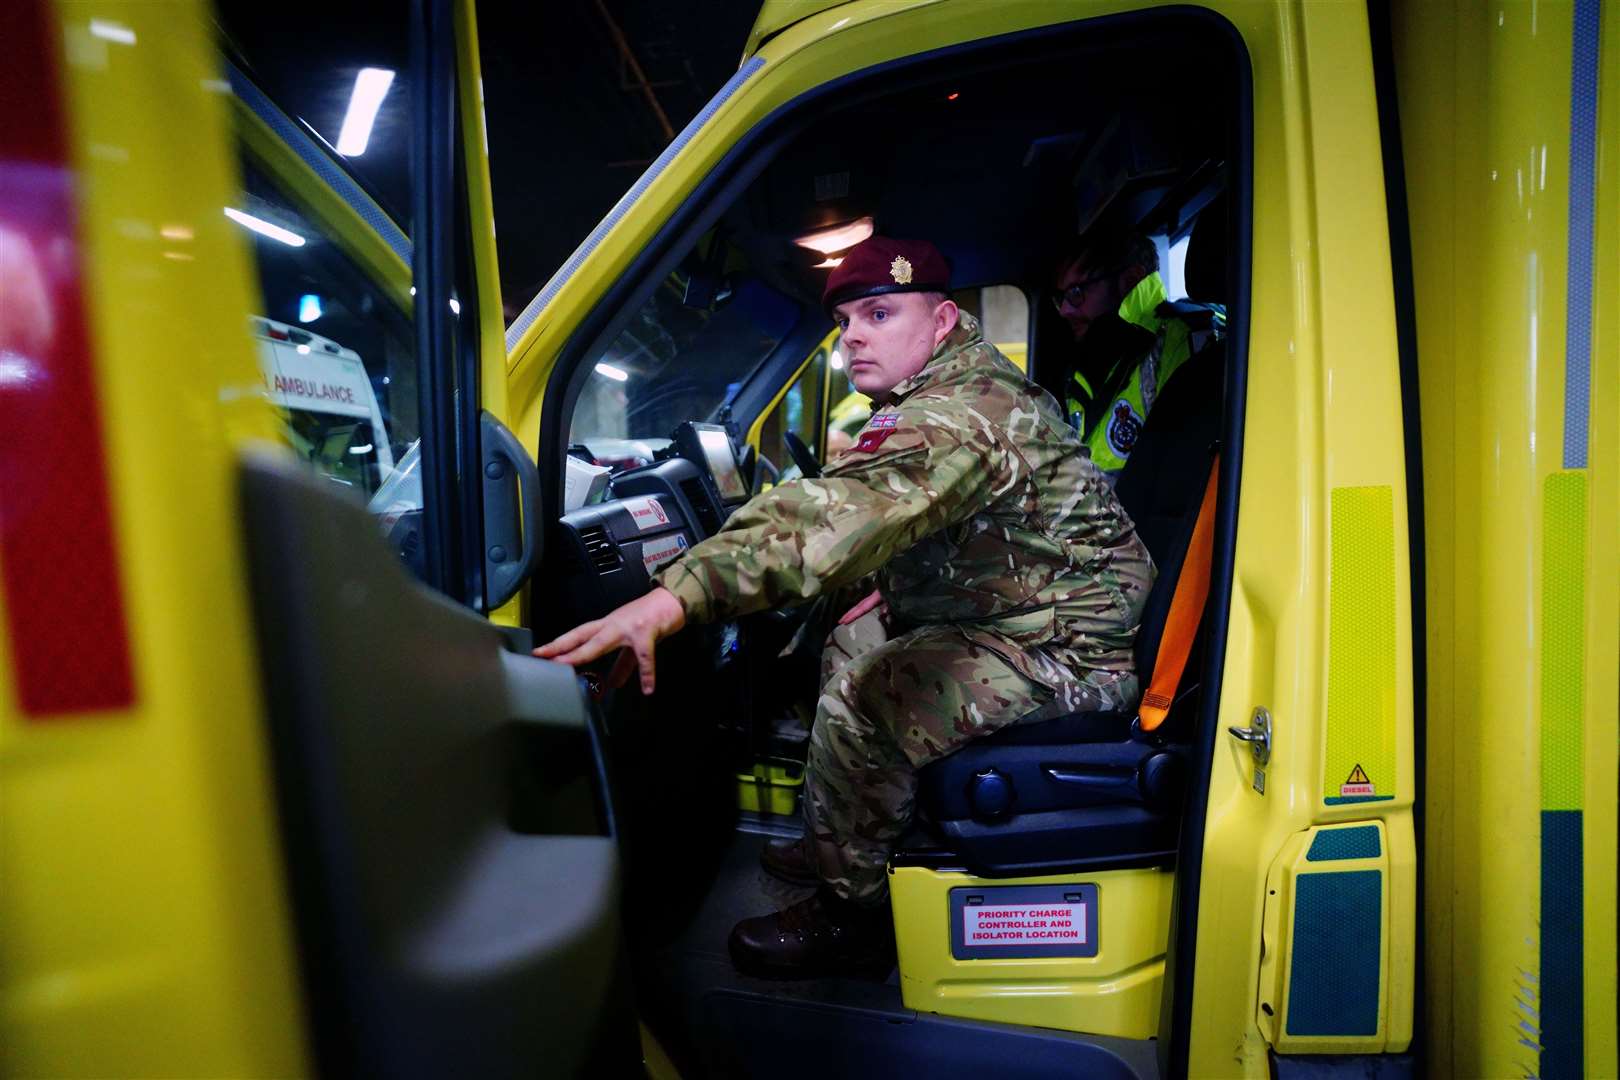 Soldiers preparing to provide support for ambulance crews during the strike (Victoria Jones/PA)